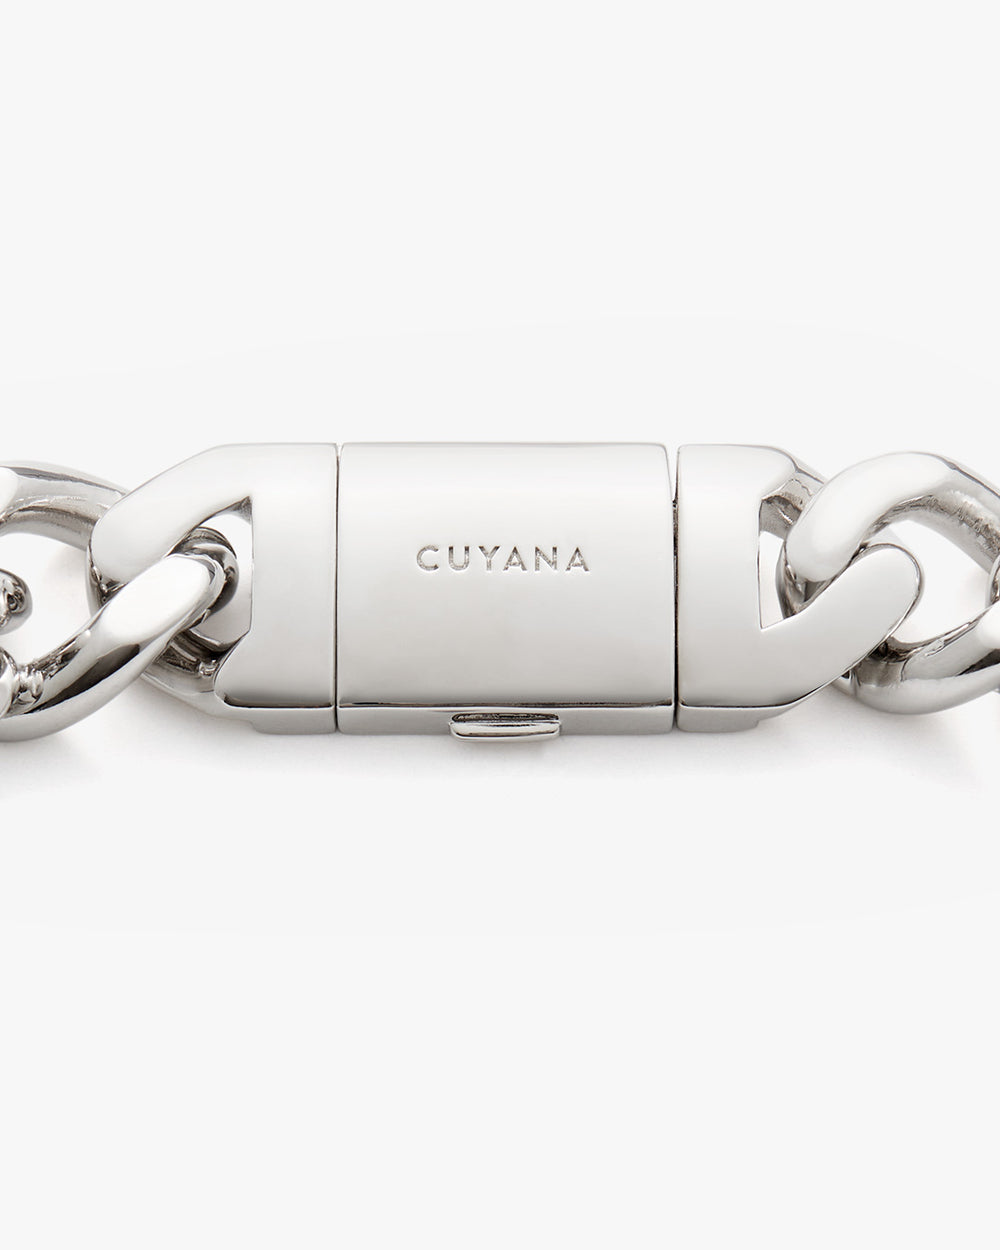 Close-up of a metal clasp on a chain with engraved branding.